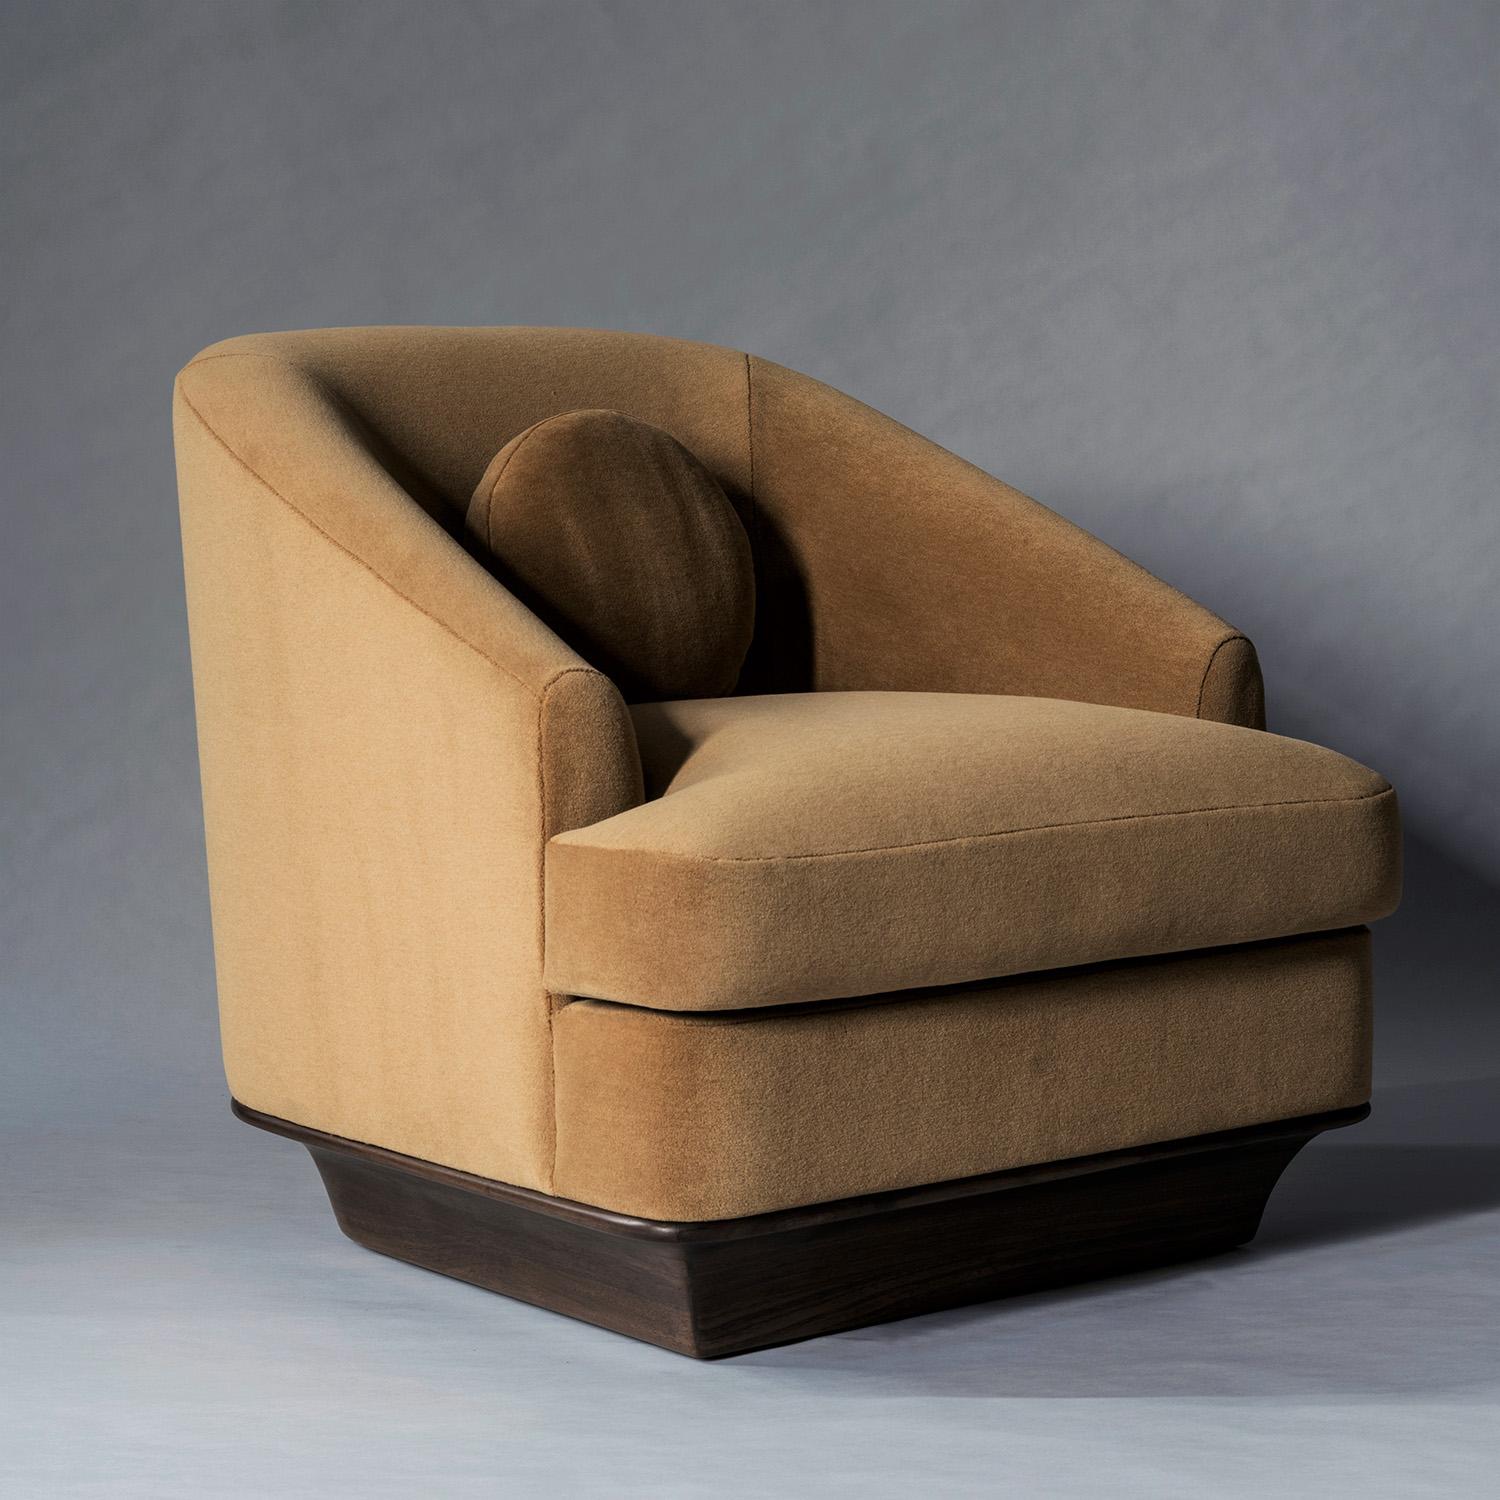 The Nico Lounge Chair combines handsome proportions with timeless materials and an emphasis on comfort. Straight lines are tempered by curved edges and sloping arms, resulting in a thoughtful balance of hard and soft elements. Subtle decorative